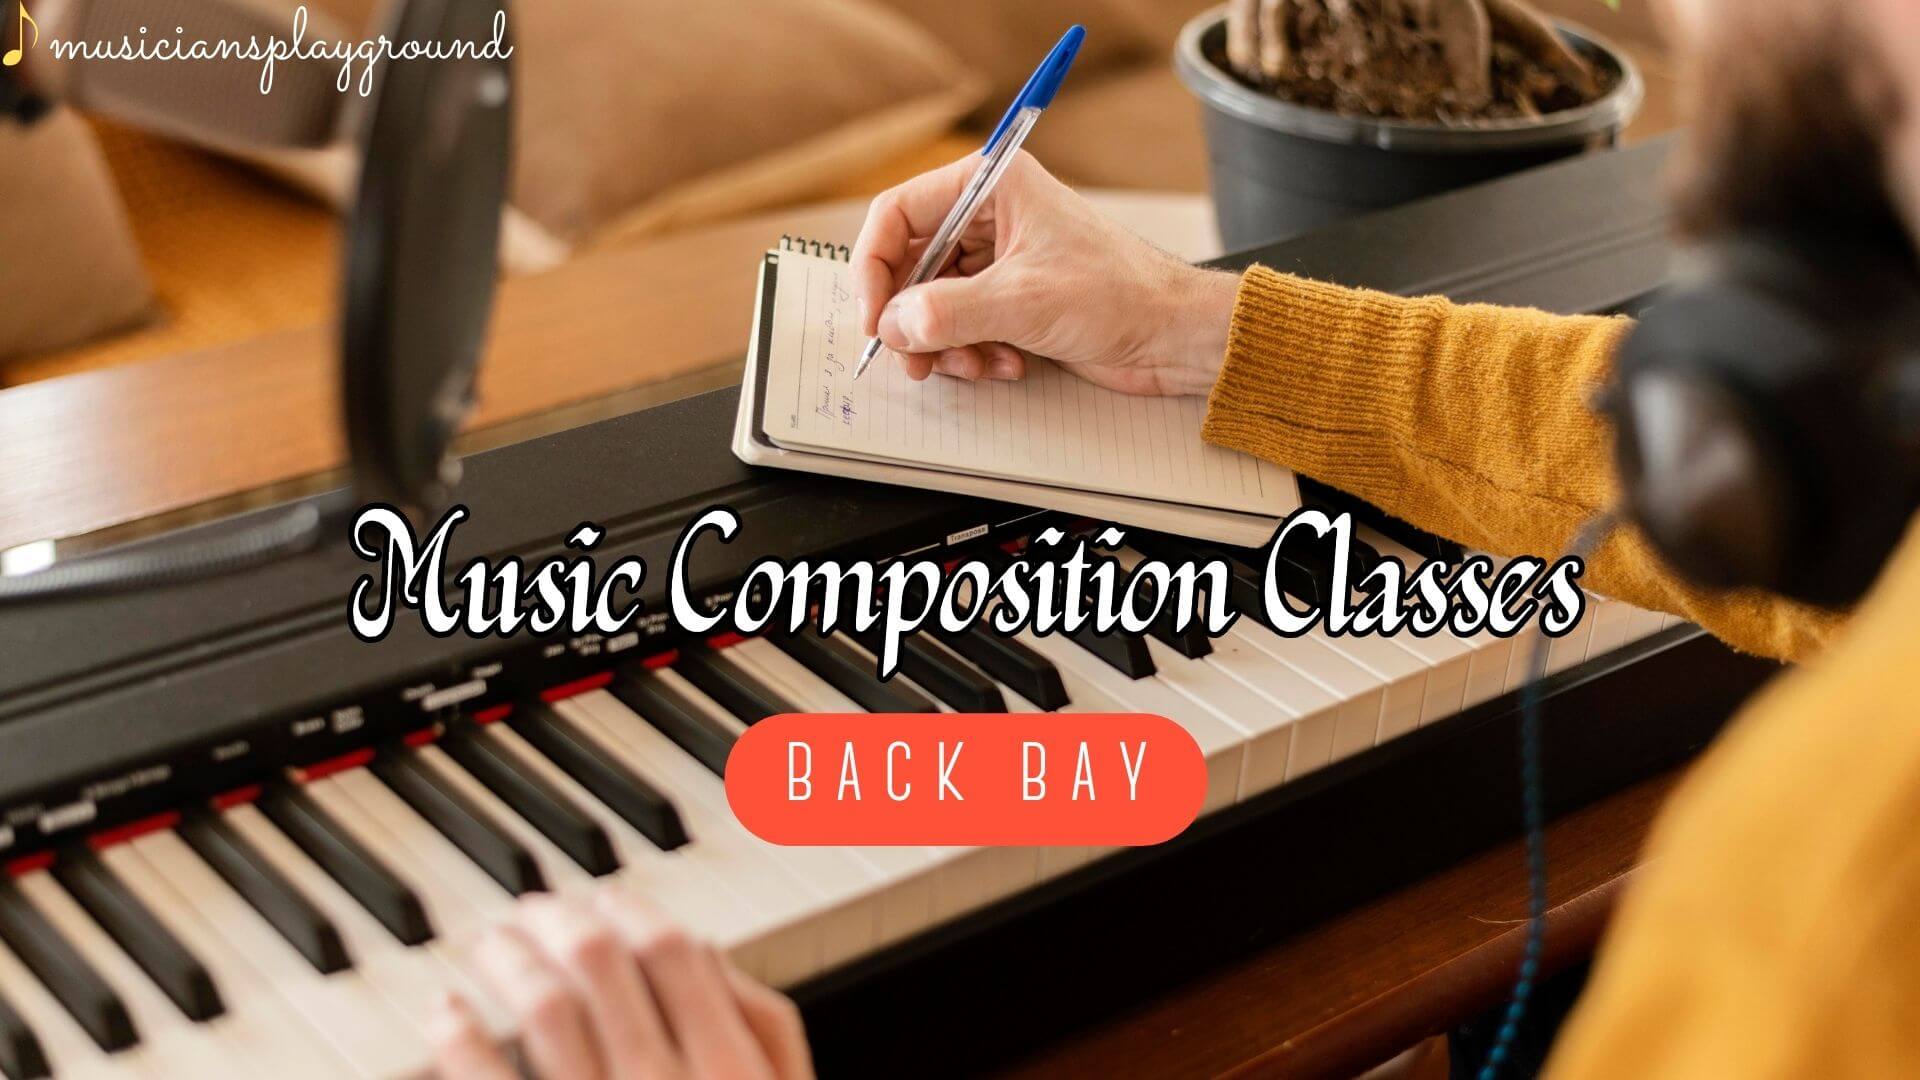 Music Composition Classes in Back Bay, Massachusetts: Unlock Your Musical Potential at Musicians Playground